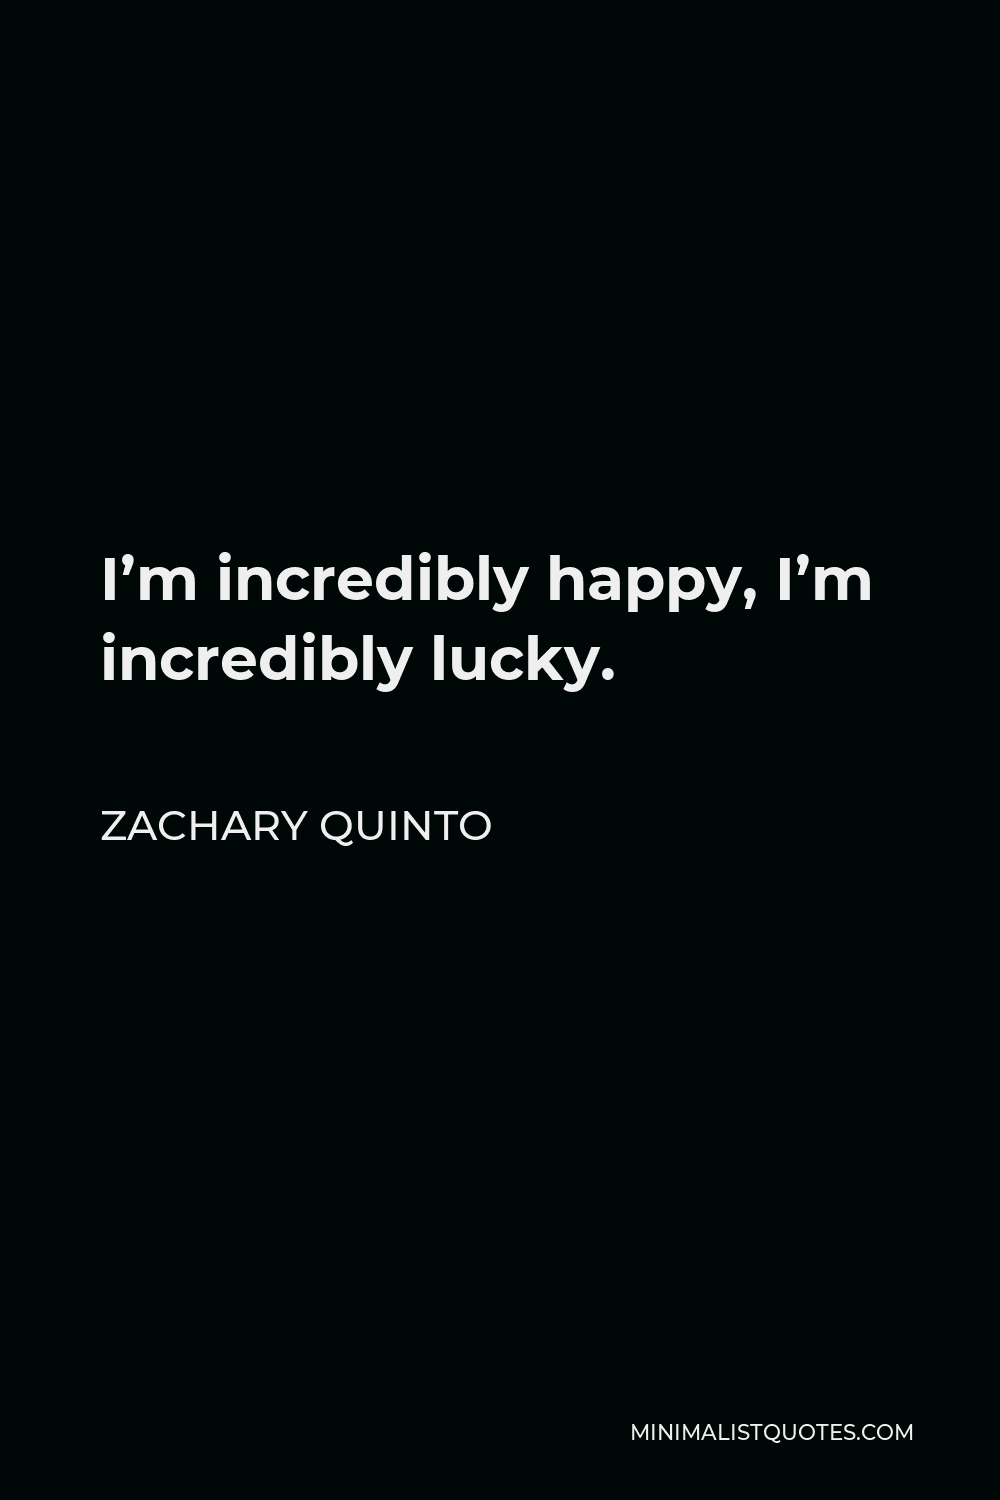 Zachary Quinto Quote - I’m incredibly happy, I’m incredibly lucky.